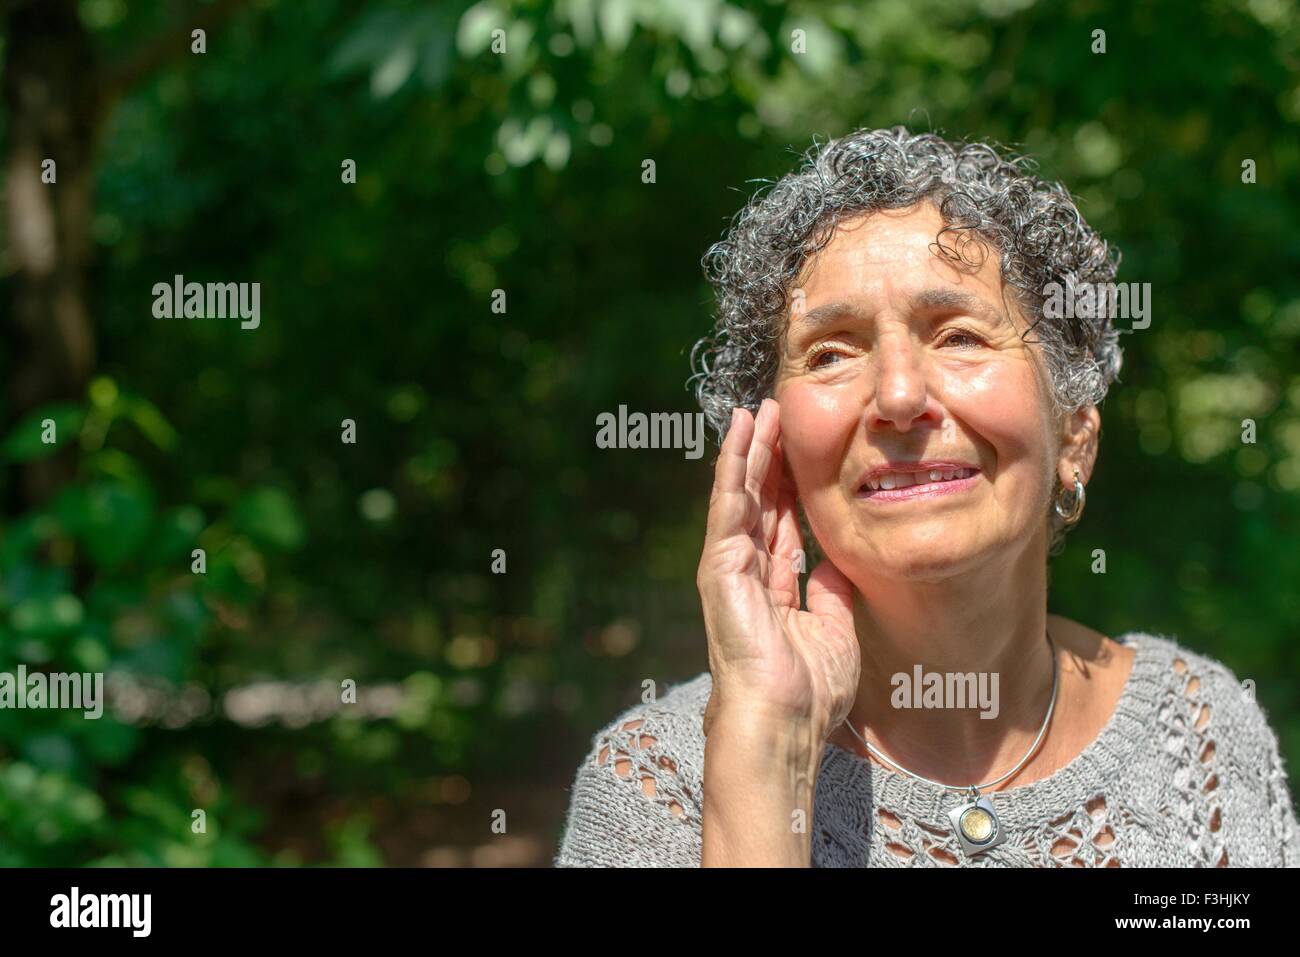 Senior woman with hand on face in park Stock Photo